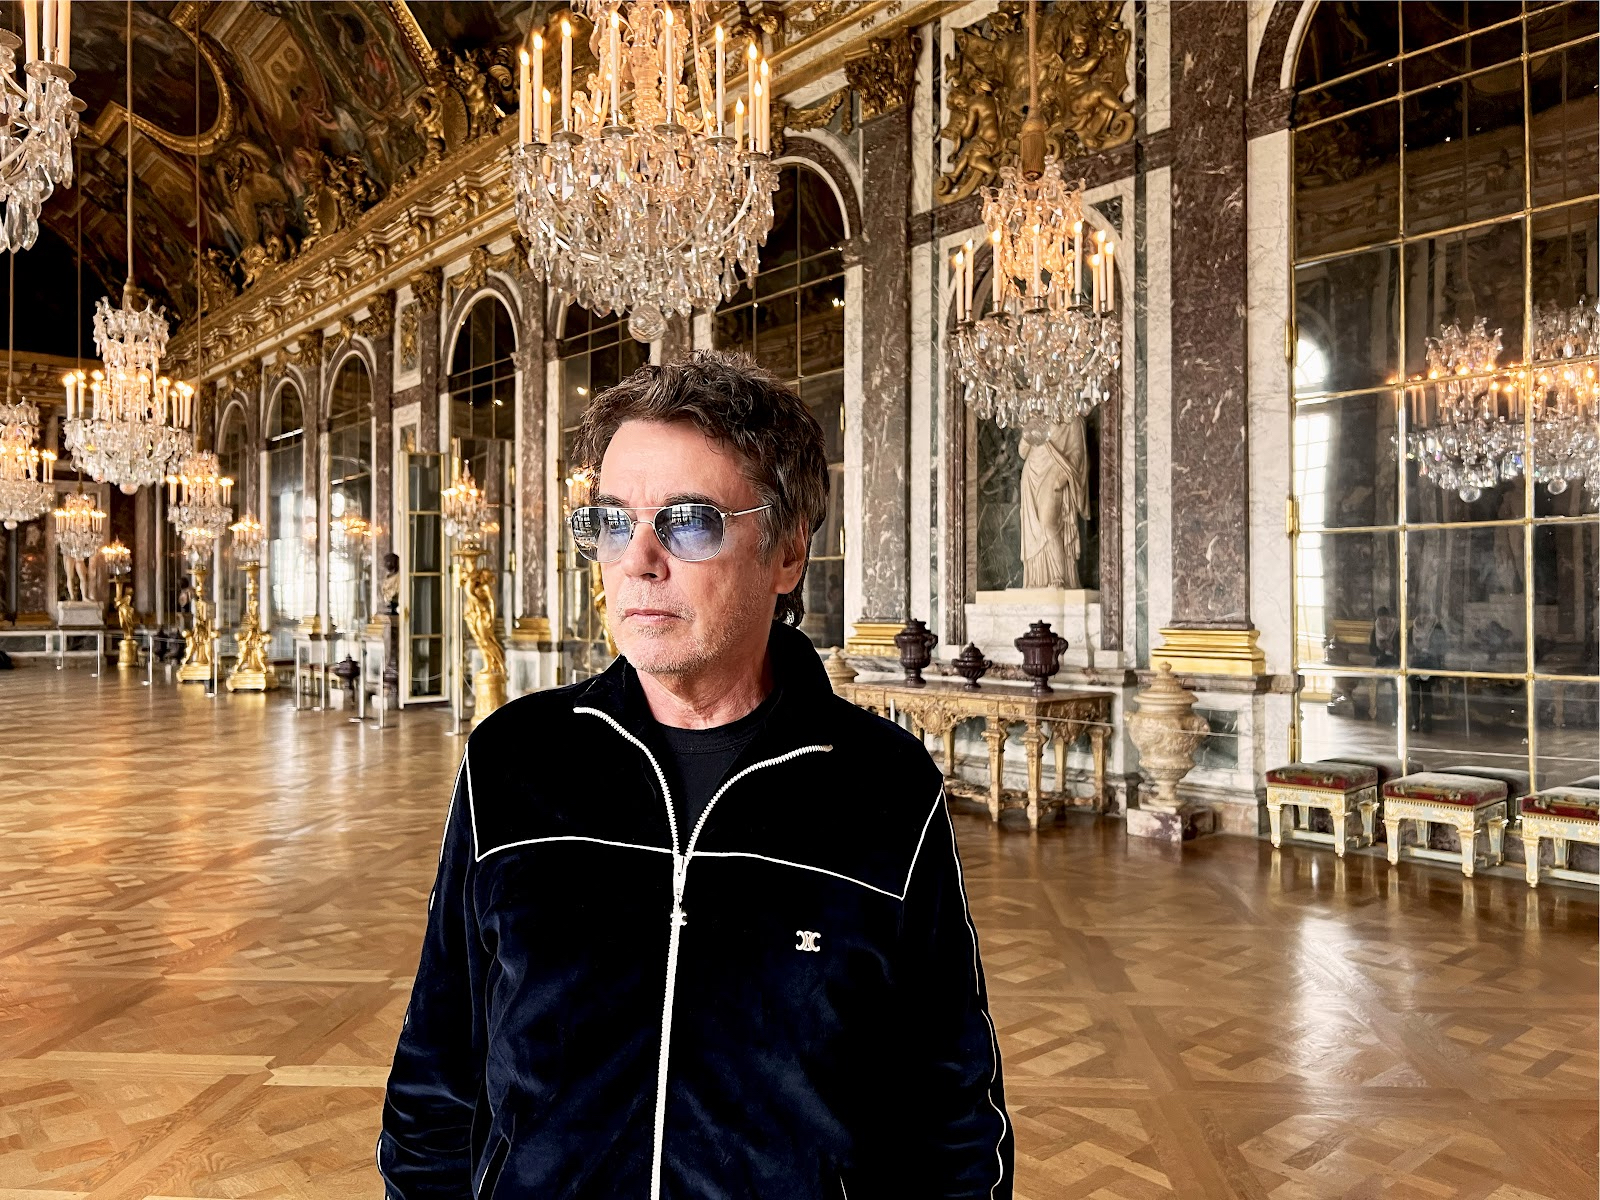 VERSAILLES 400: AN INNOVATIVE MIXED-REALITY CONCERT BY JEAN-MICHEL JARRE